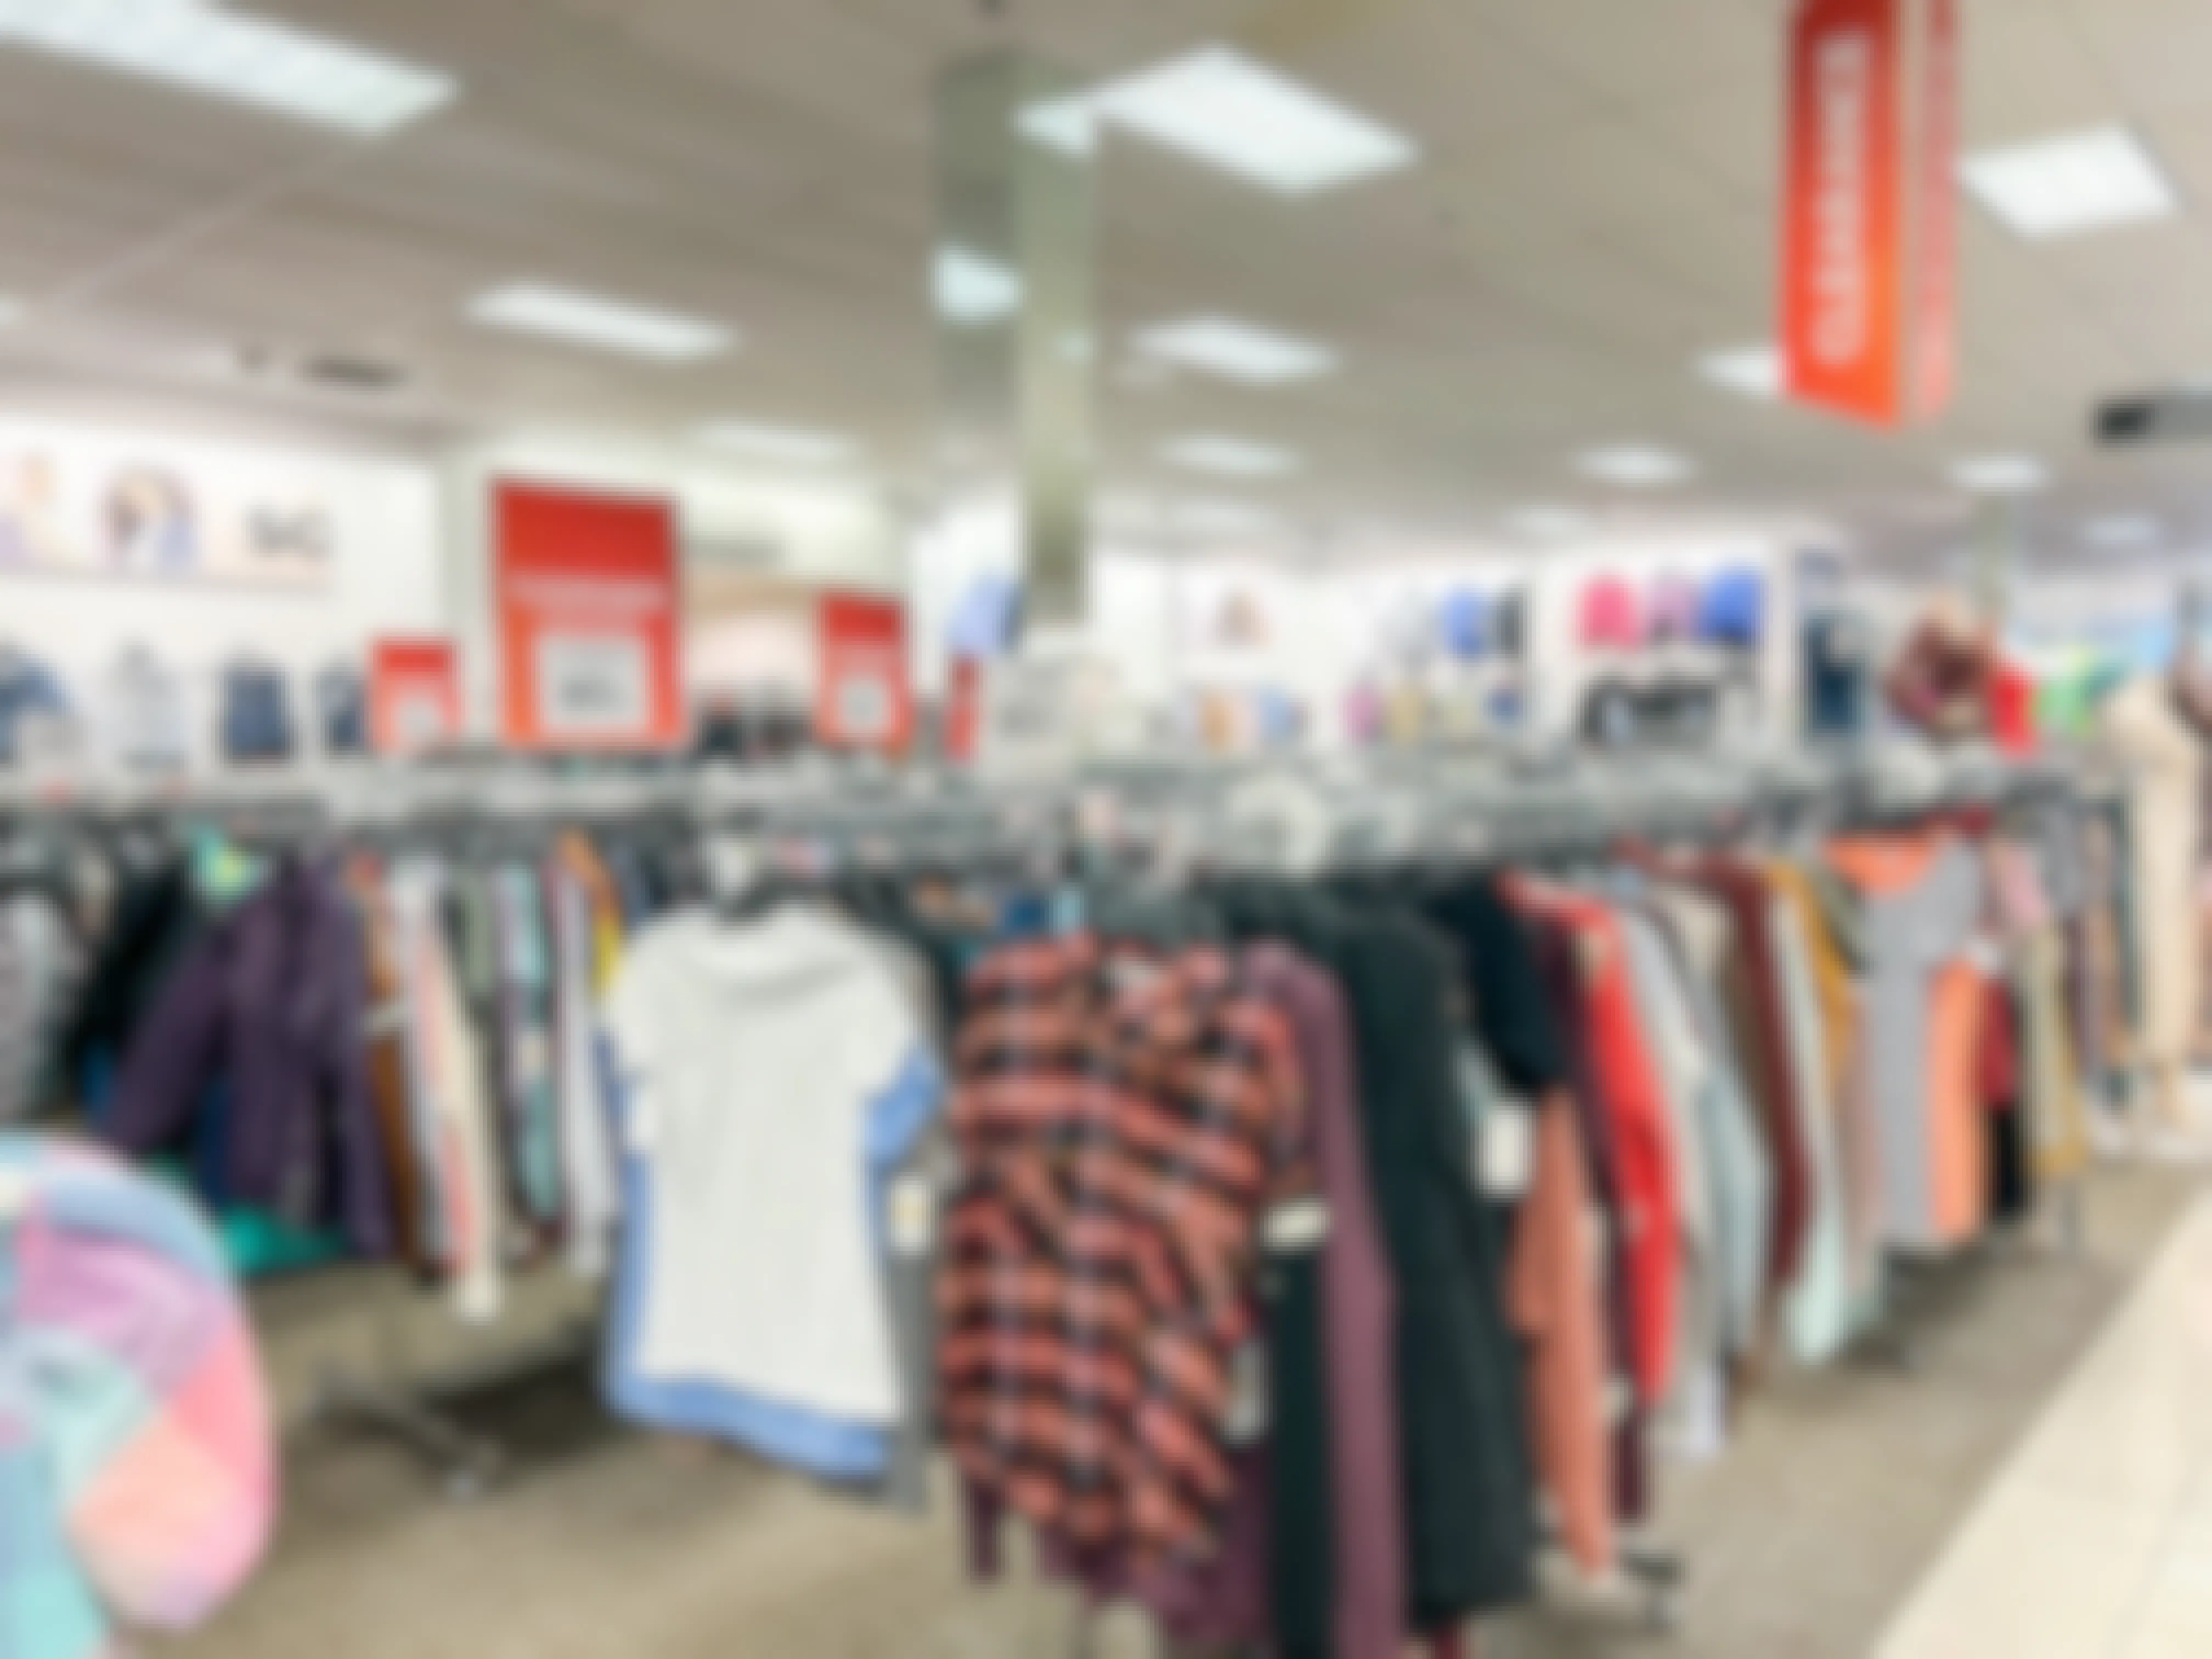 Clearance section of Kohls